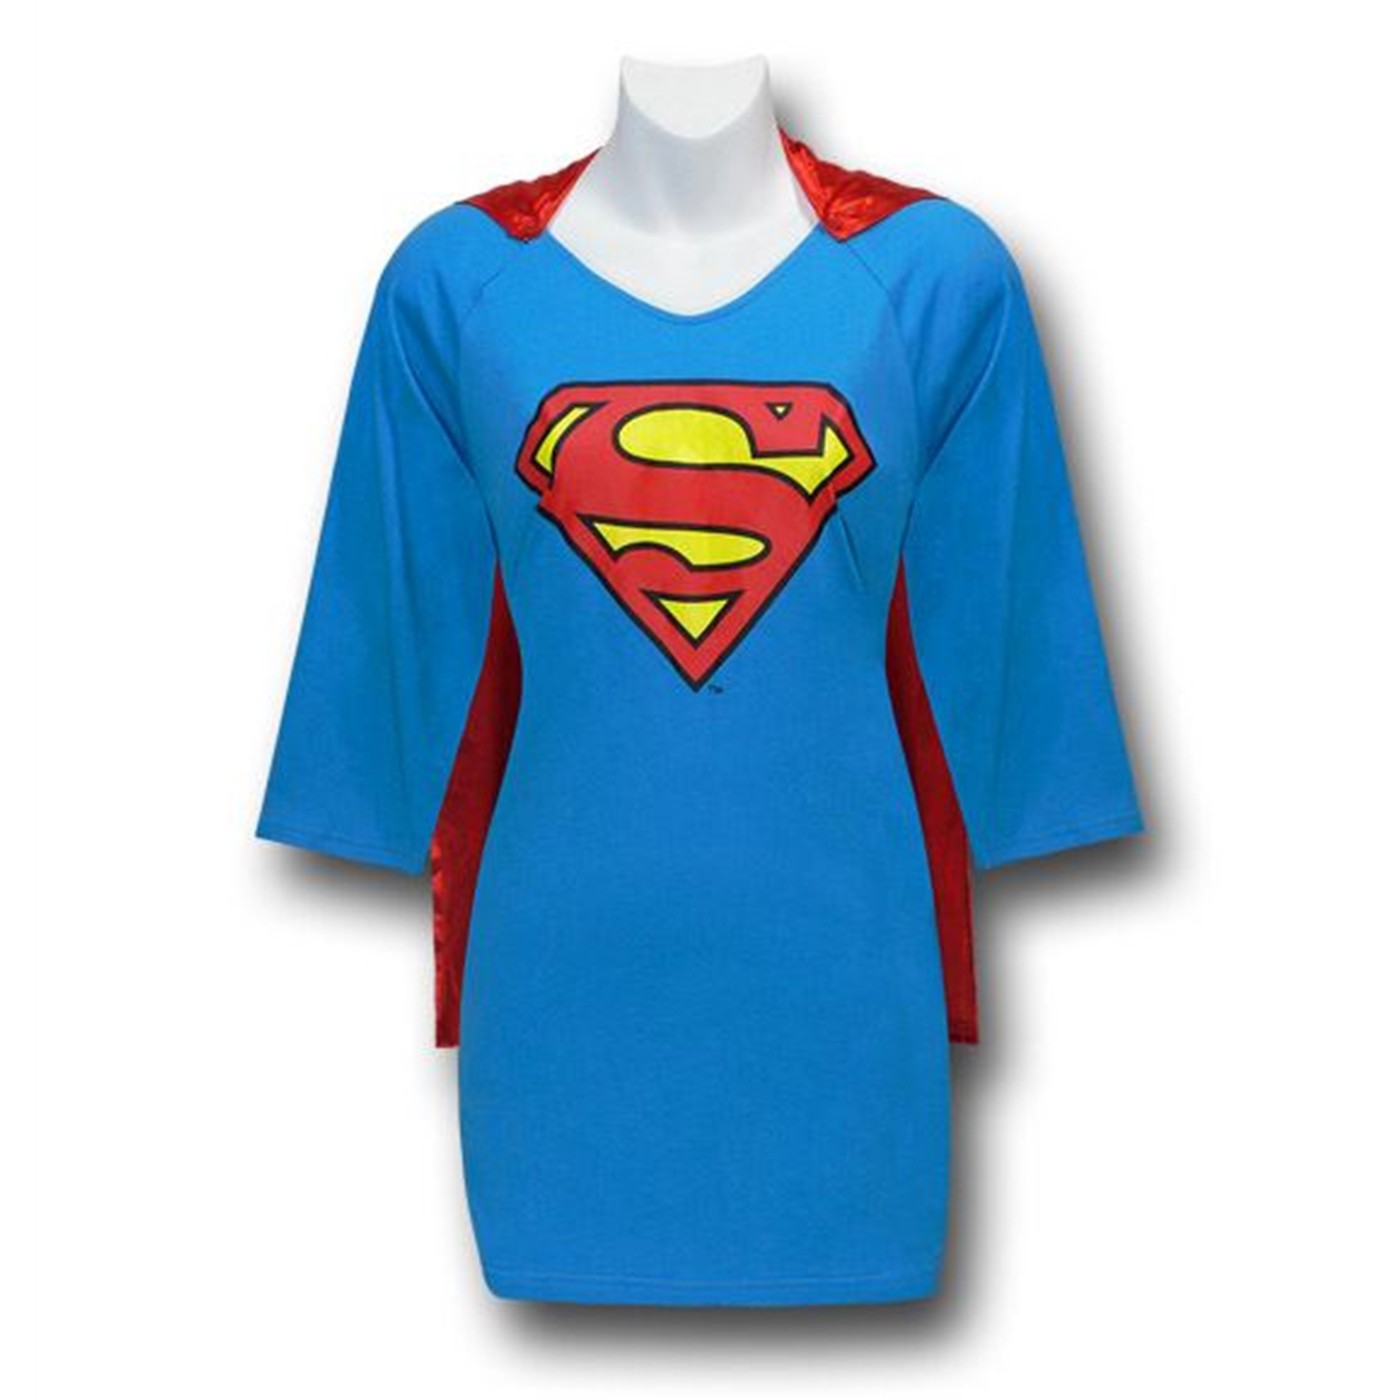 Supergirl Women's Night Shirt with Cape